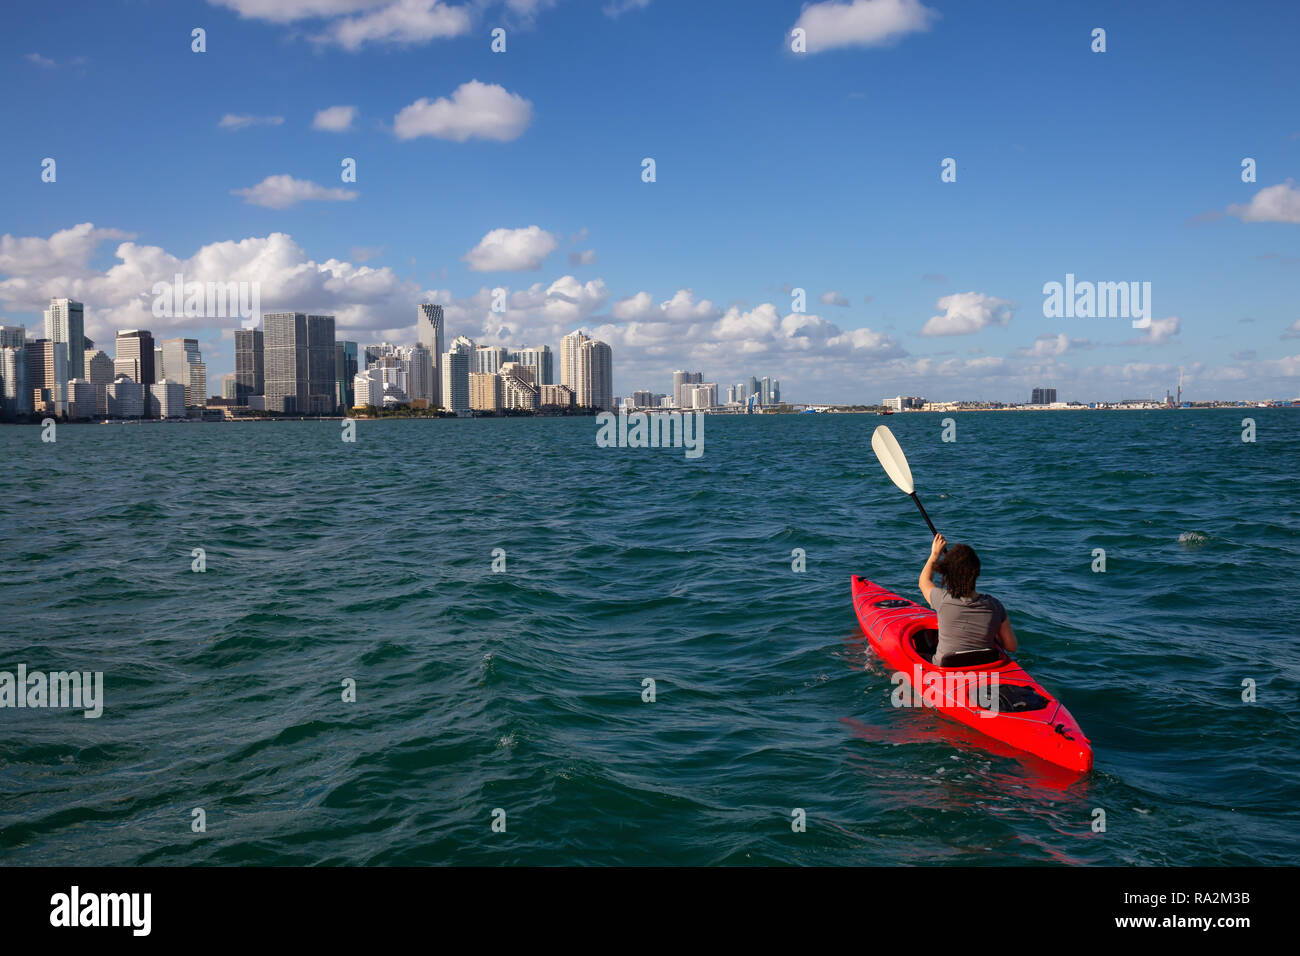 Adventurous girl kayaking in front of a modern Downtown Cityscape during a sunny evening. Taken in Miami, Florida, United States of America. Stock Photo